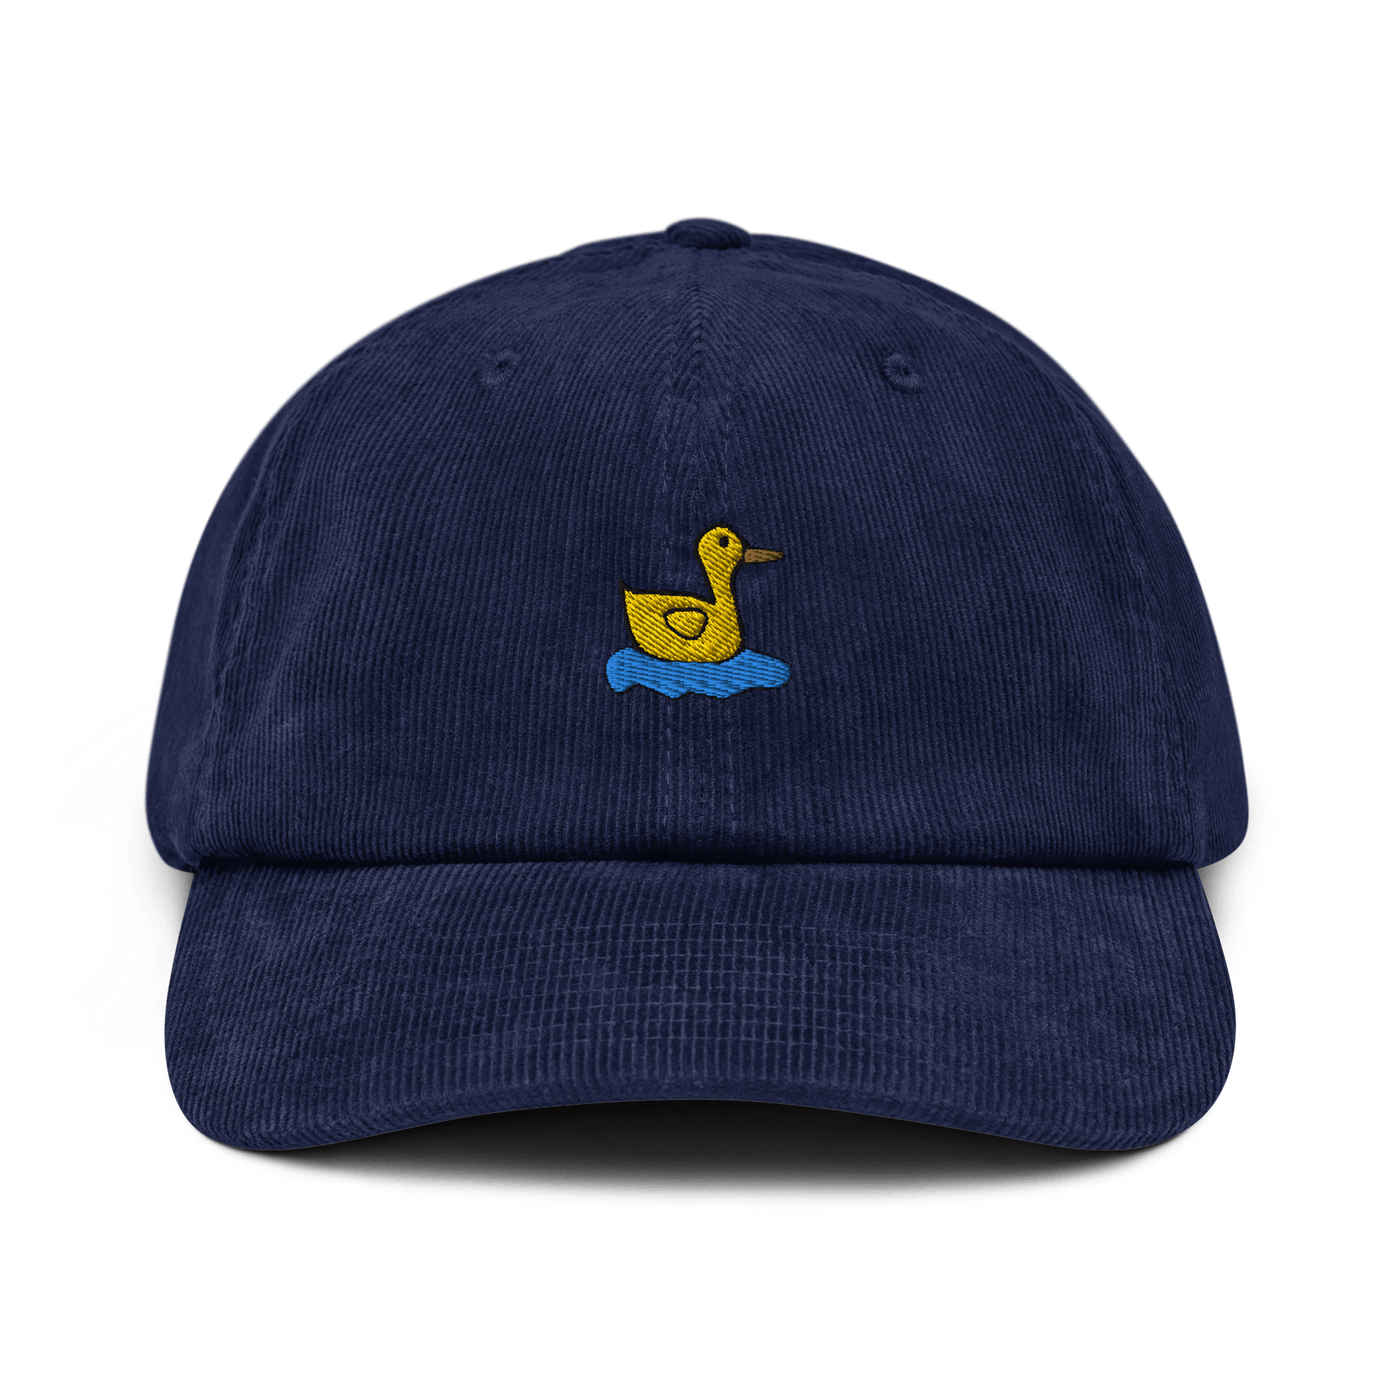 Lonely Duck Corduroy hat - Black - - Just Another Cap Store